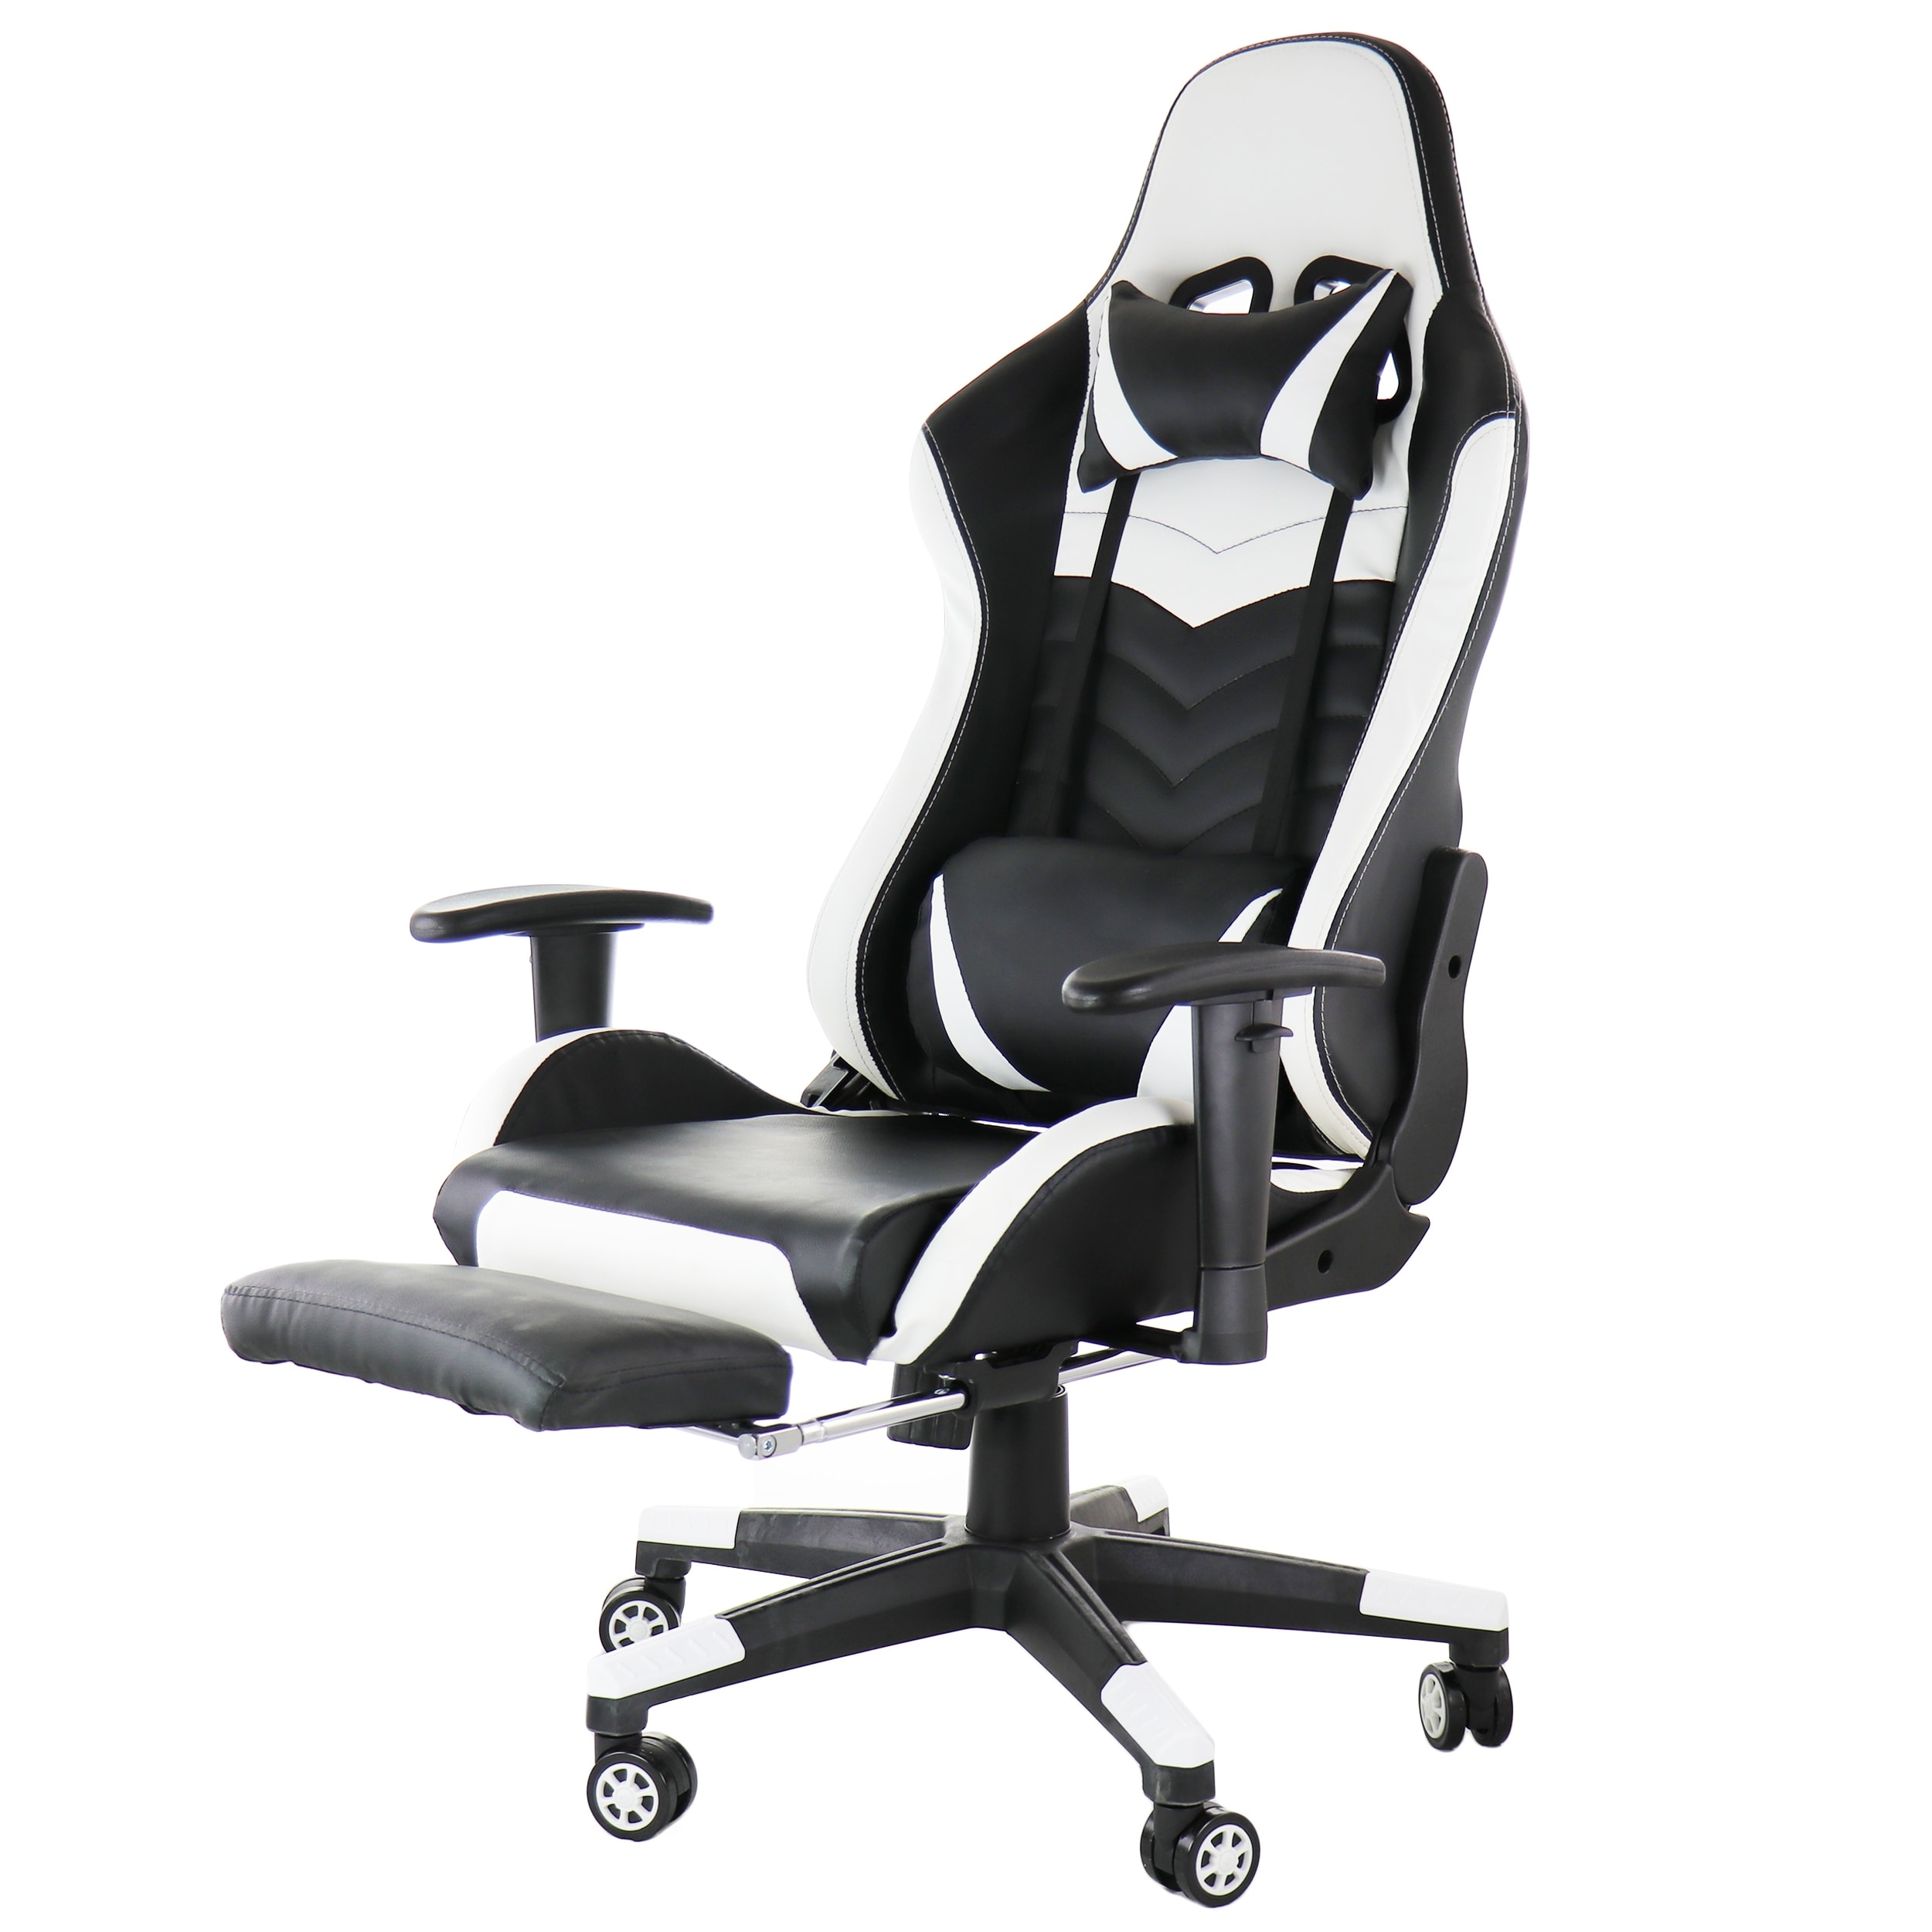 https://ak1.ostkcdn.com/images/products/is/images/direct/1e57a219f762181f0987845b47e238e71fadc406/GameFitz-Gaming-Chair-in-Black-and-White.jpg